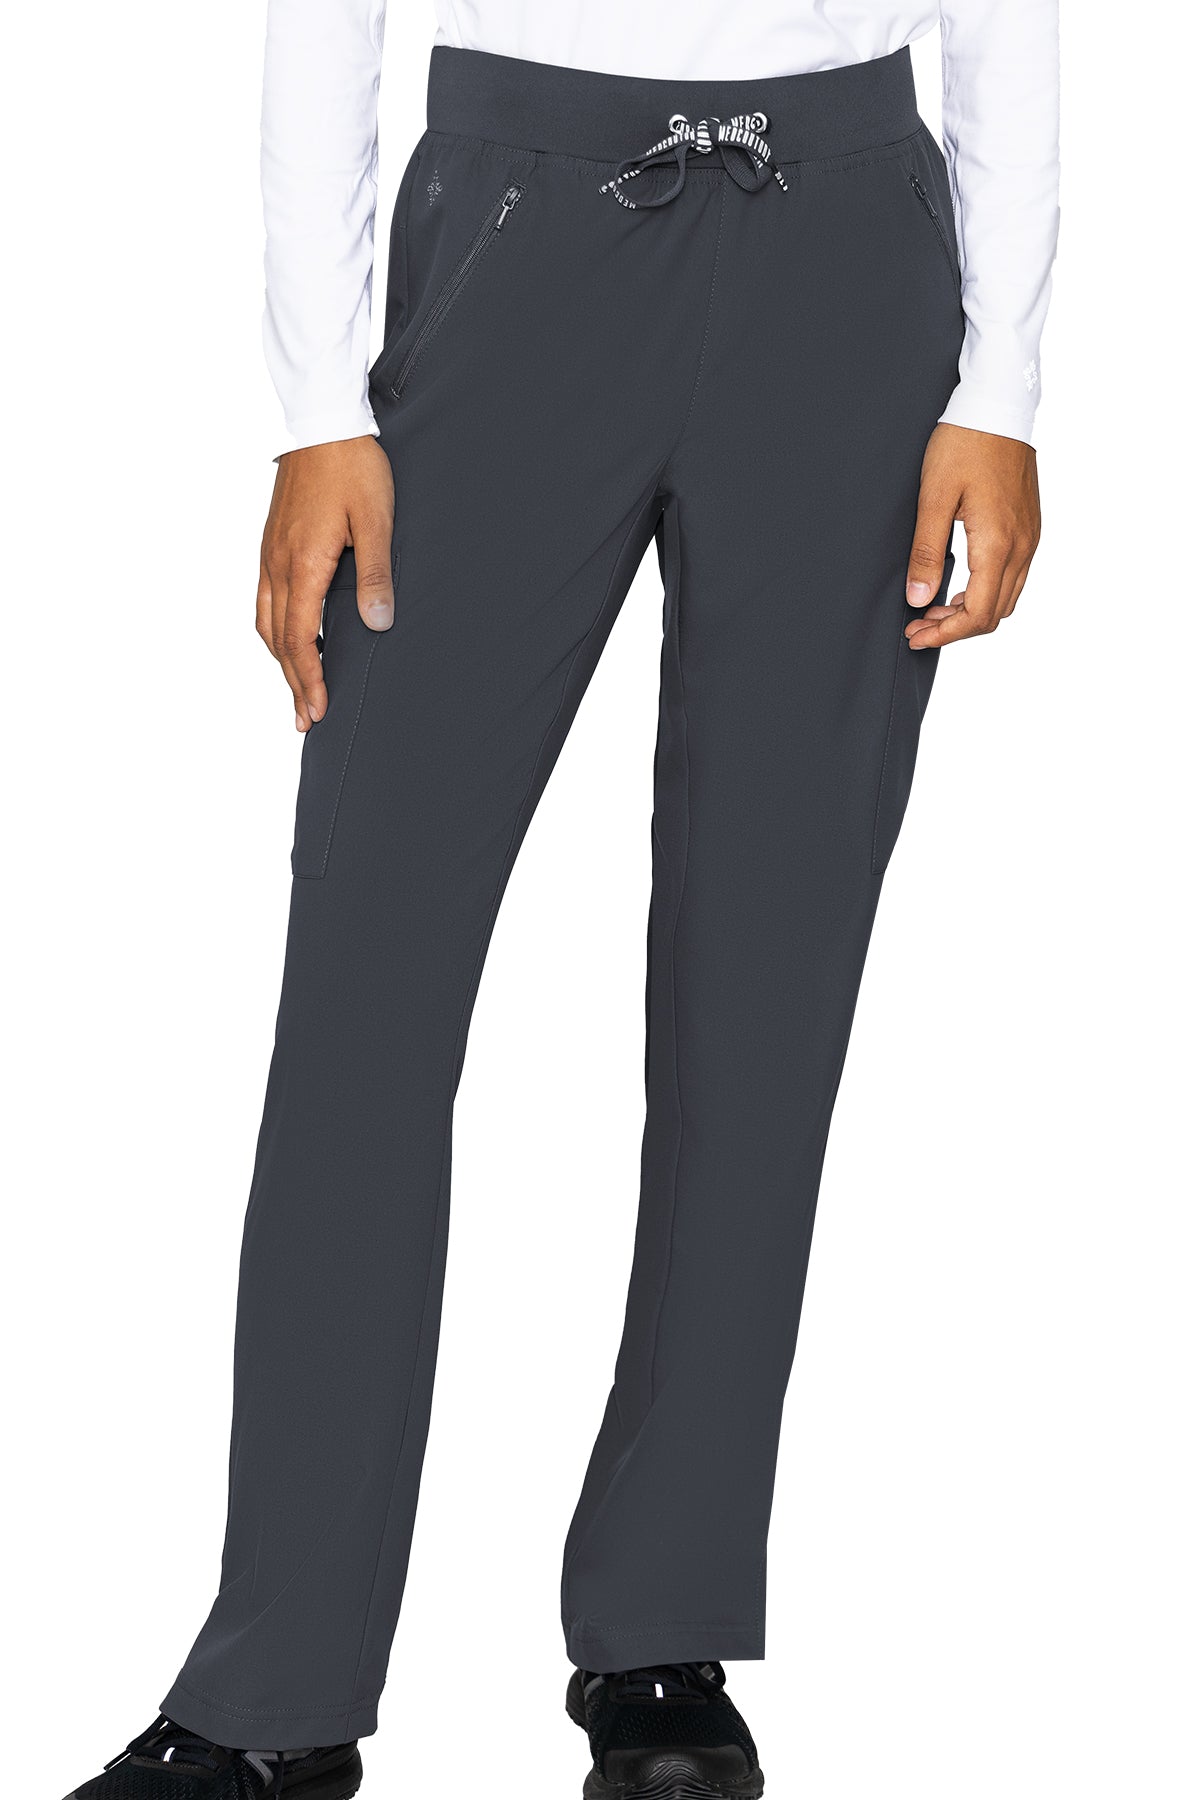 Med Couture Scrub Pants Insight Zipper Pocket Pant in Pewter at Parker's Clothing and Shoes